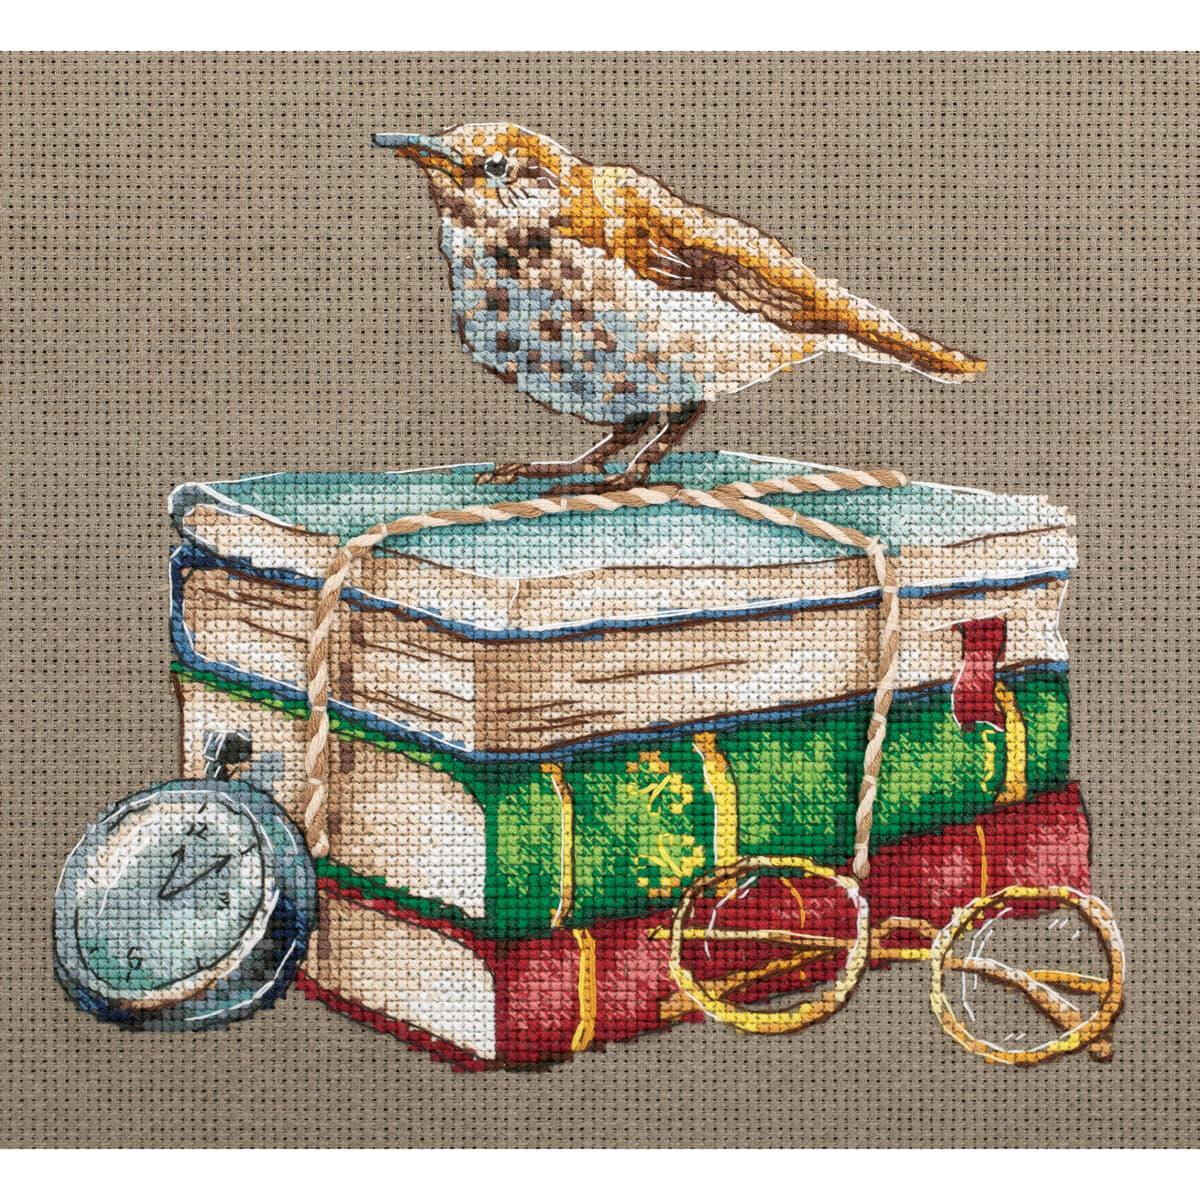 Panna counted cross stitch kit "Booklover (gray...